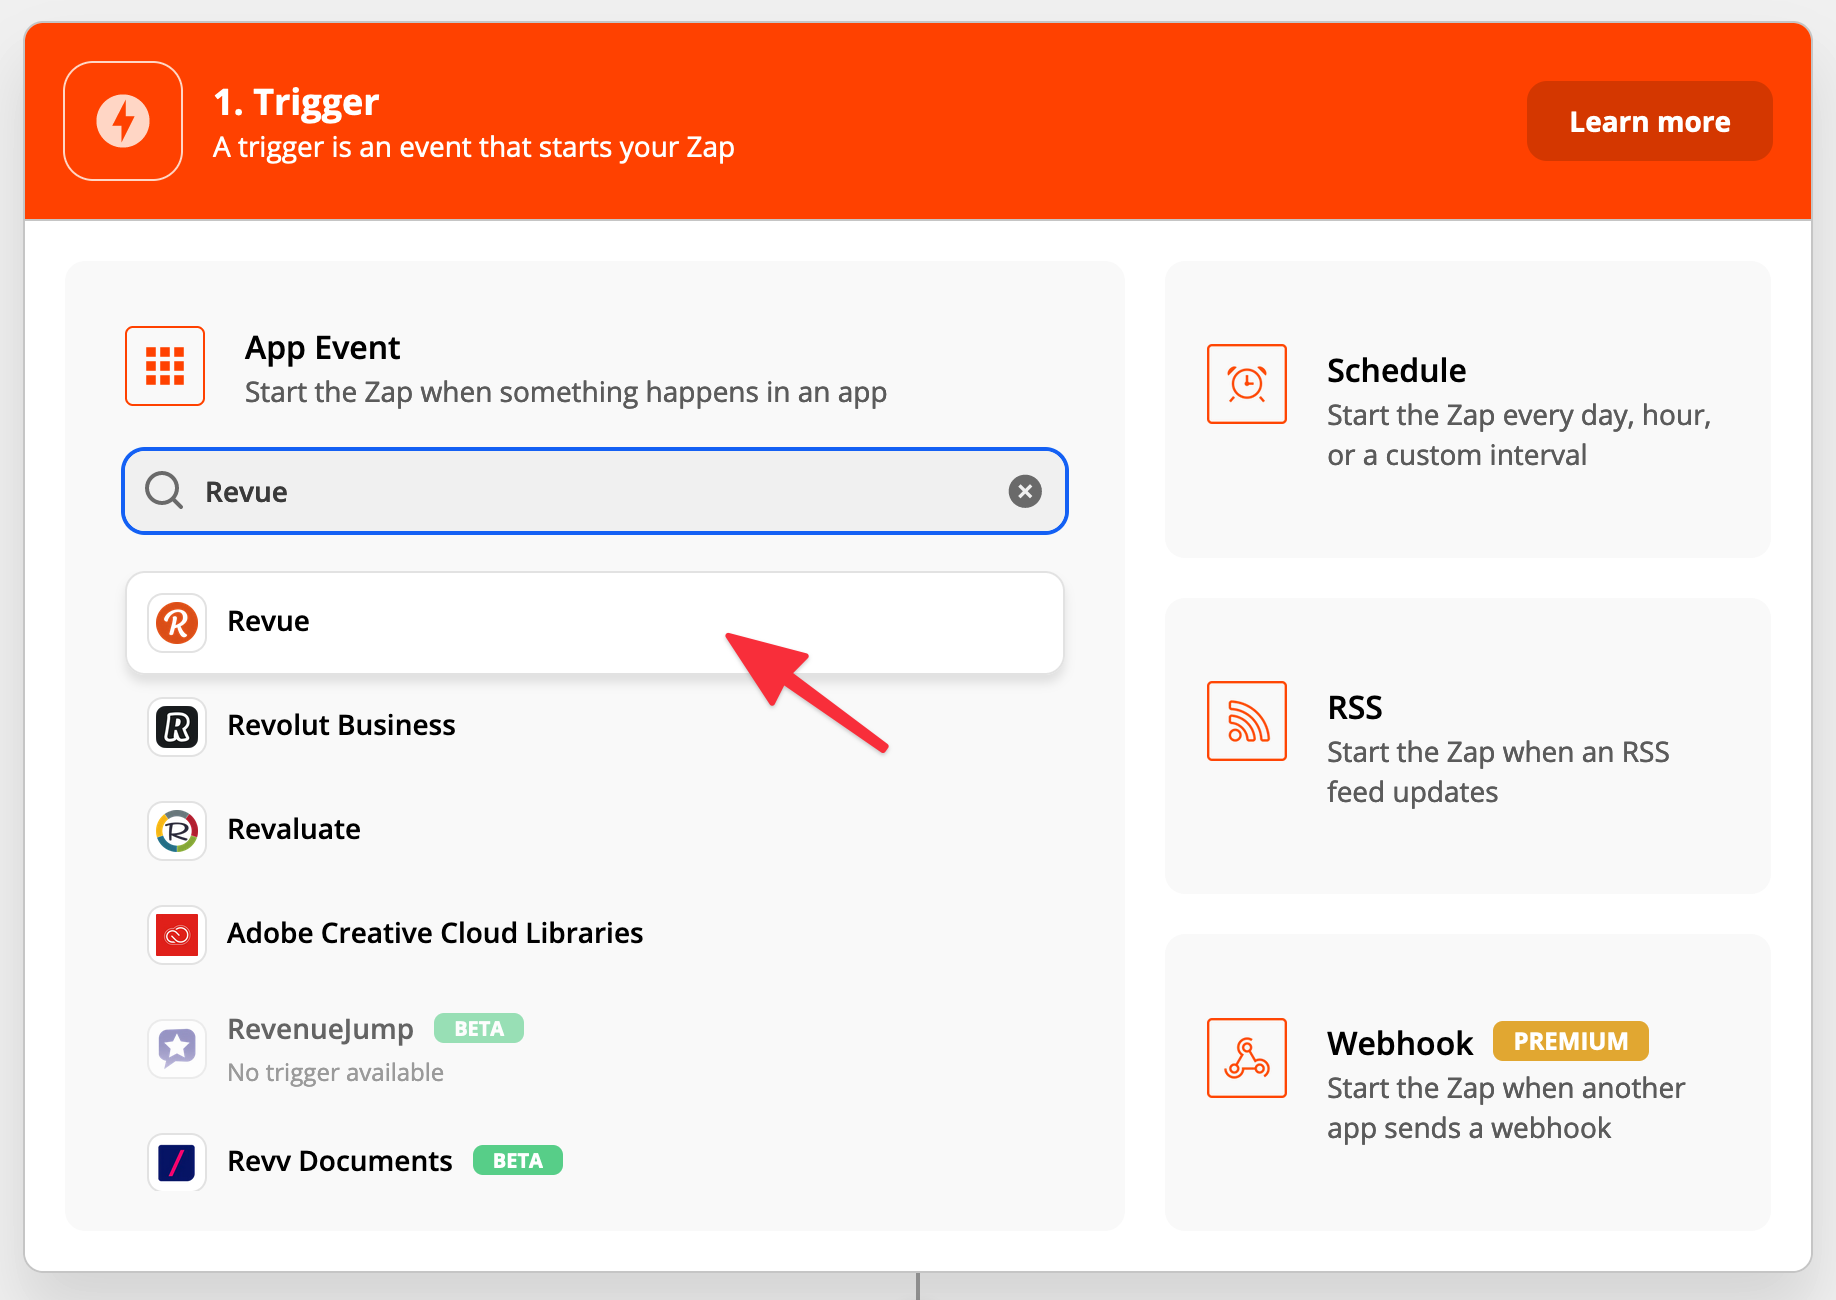 Step 1 of the Zapier integration: Select Revue for the App Event